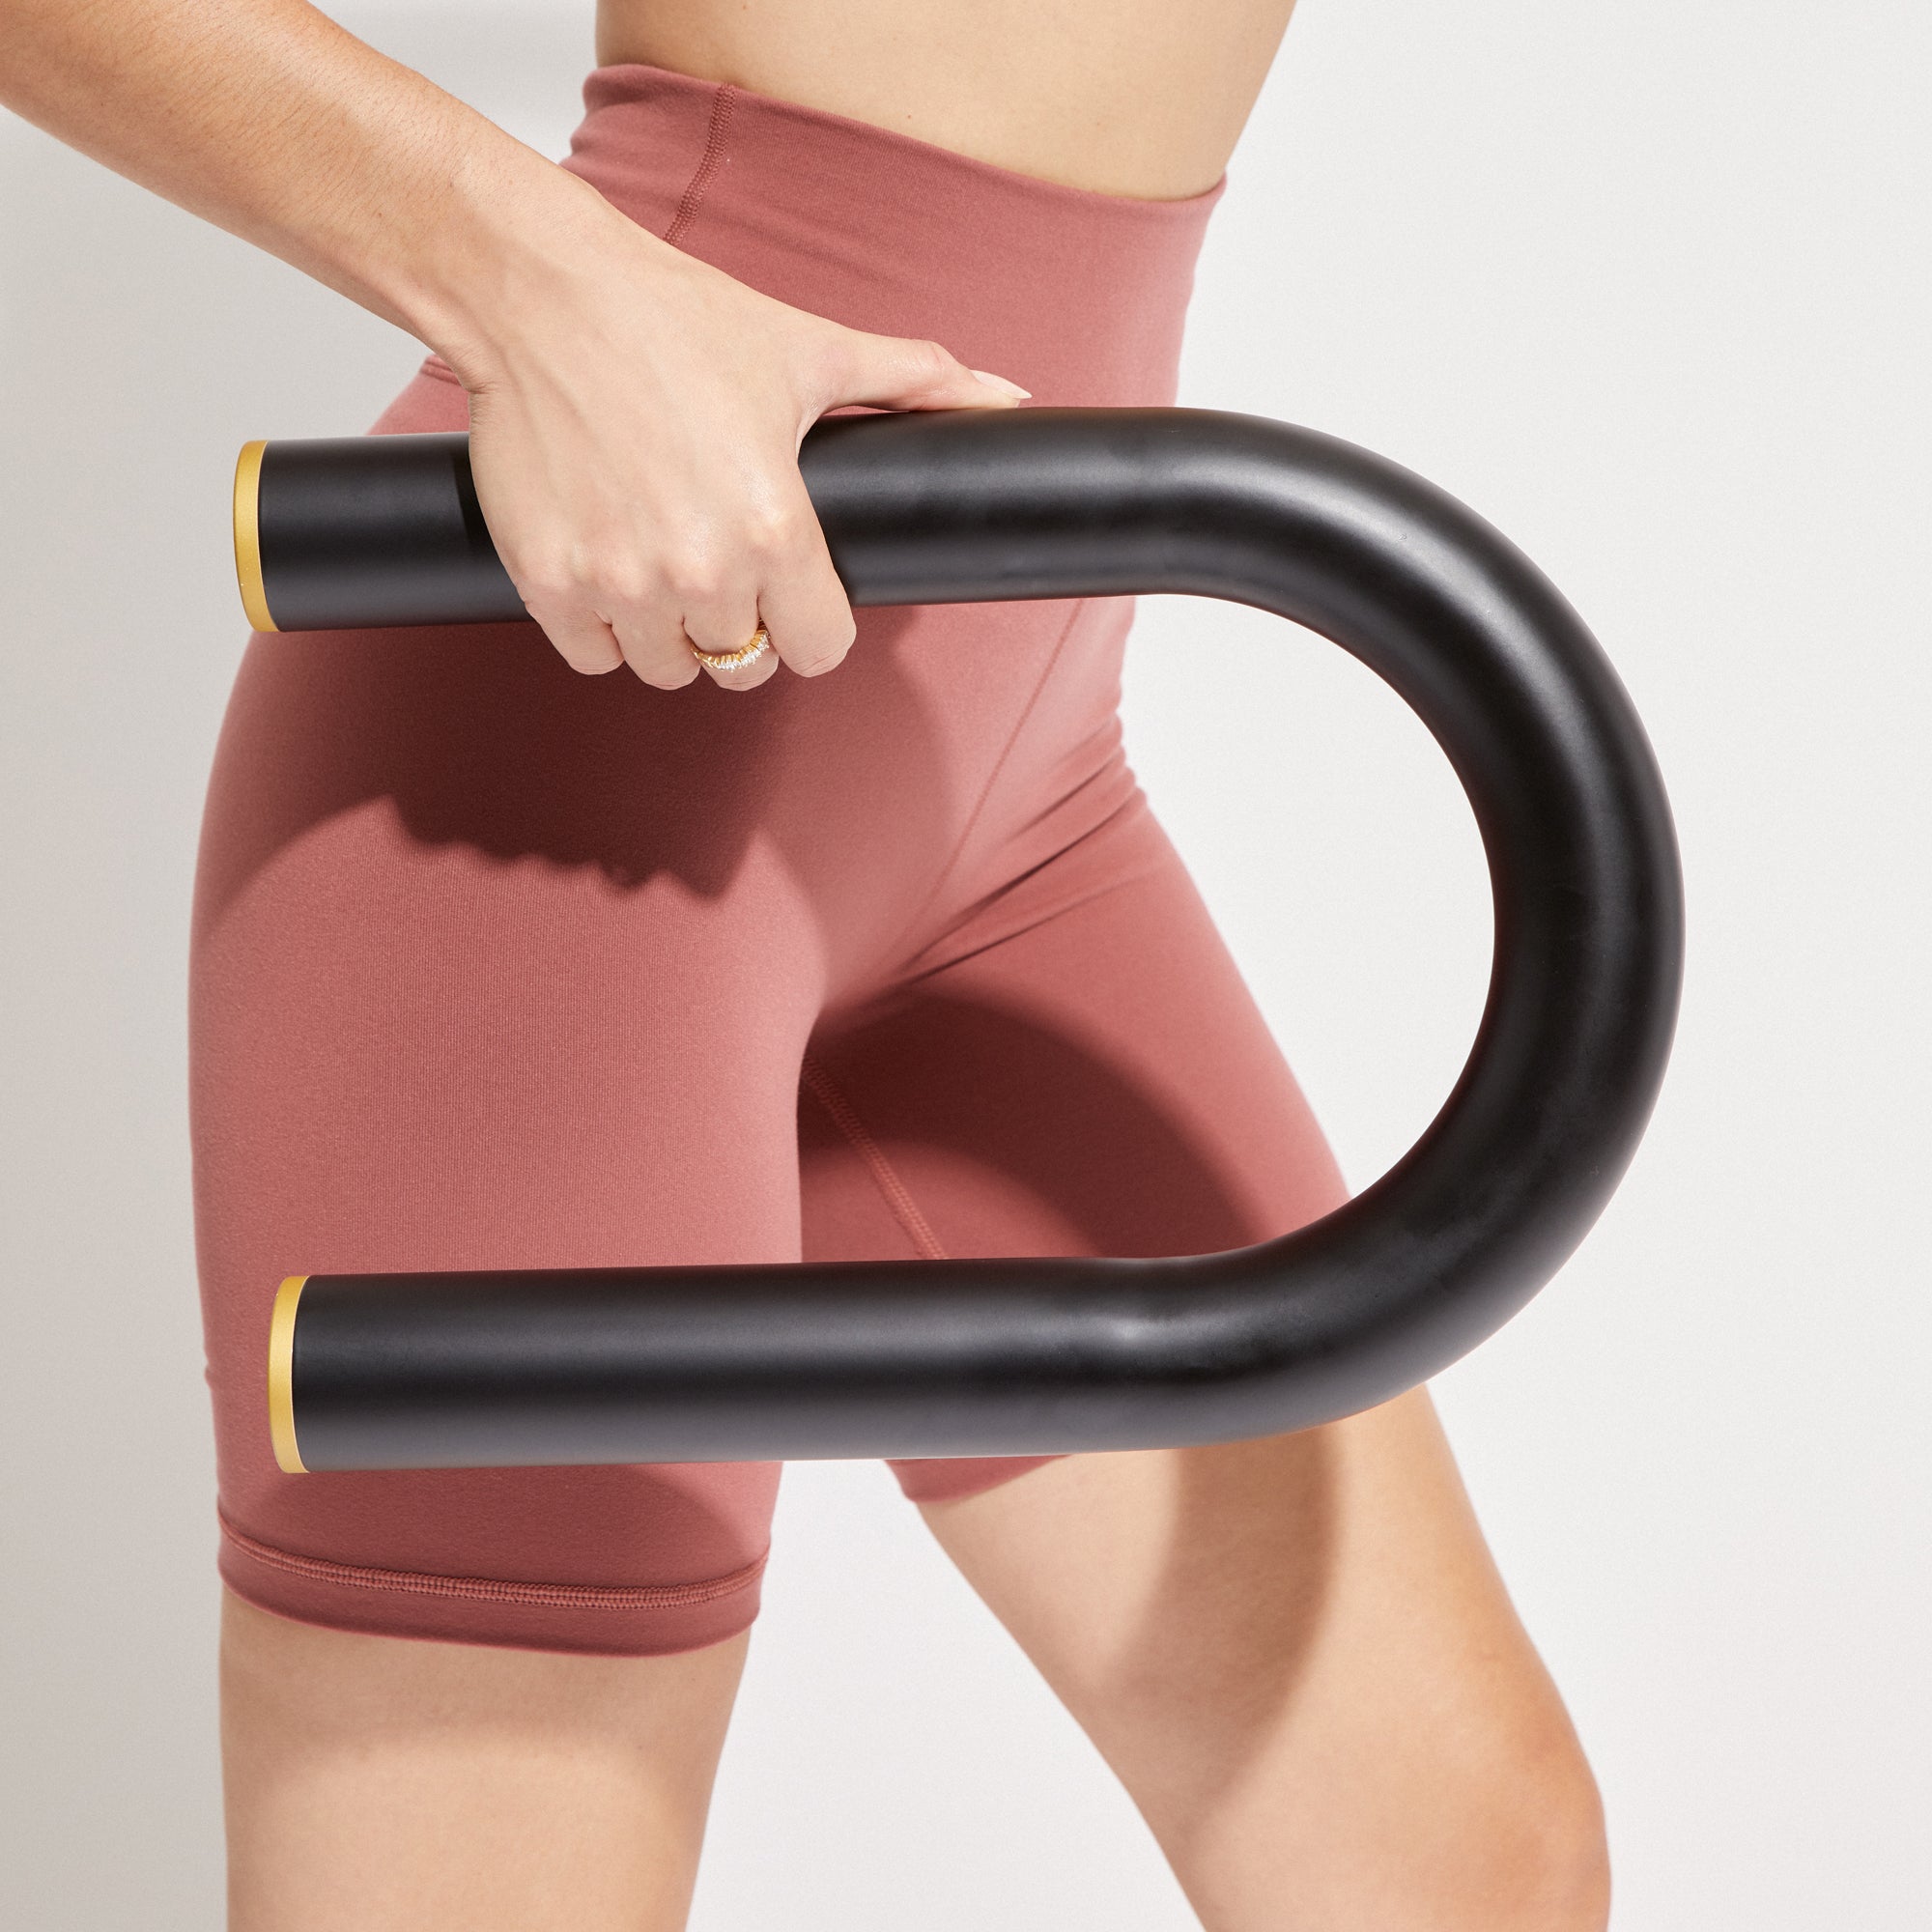  ubarre weighted workout bar in matte black  is 12lbs weight and looks like modern art in your home when not in use